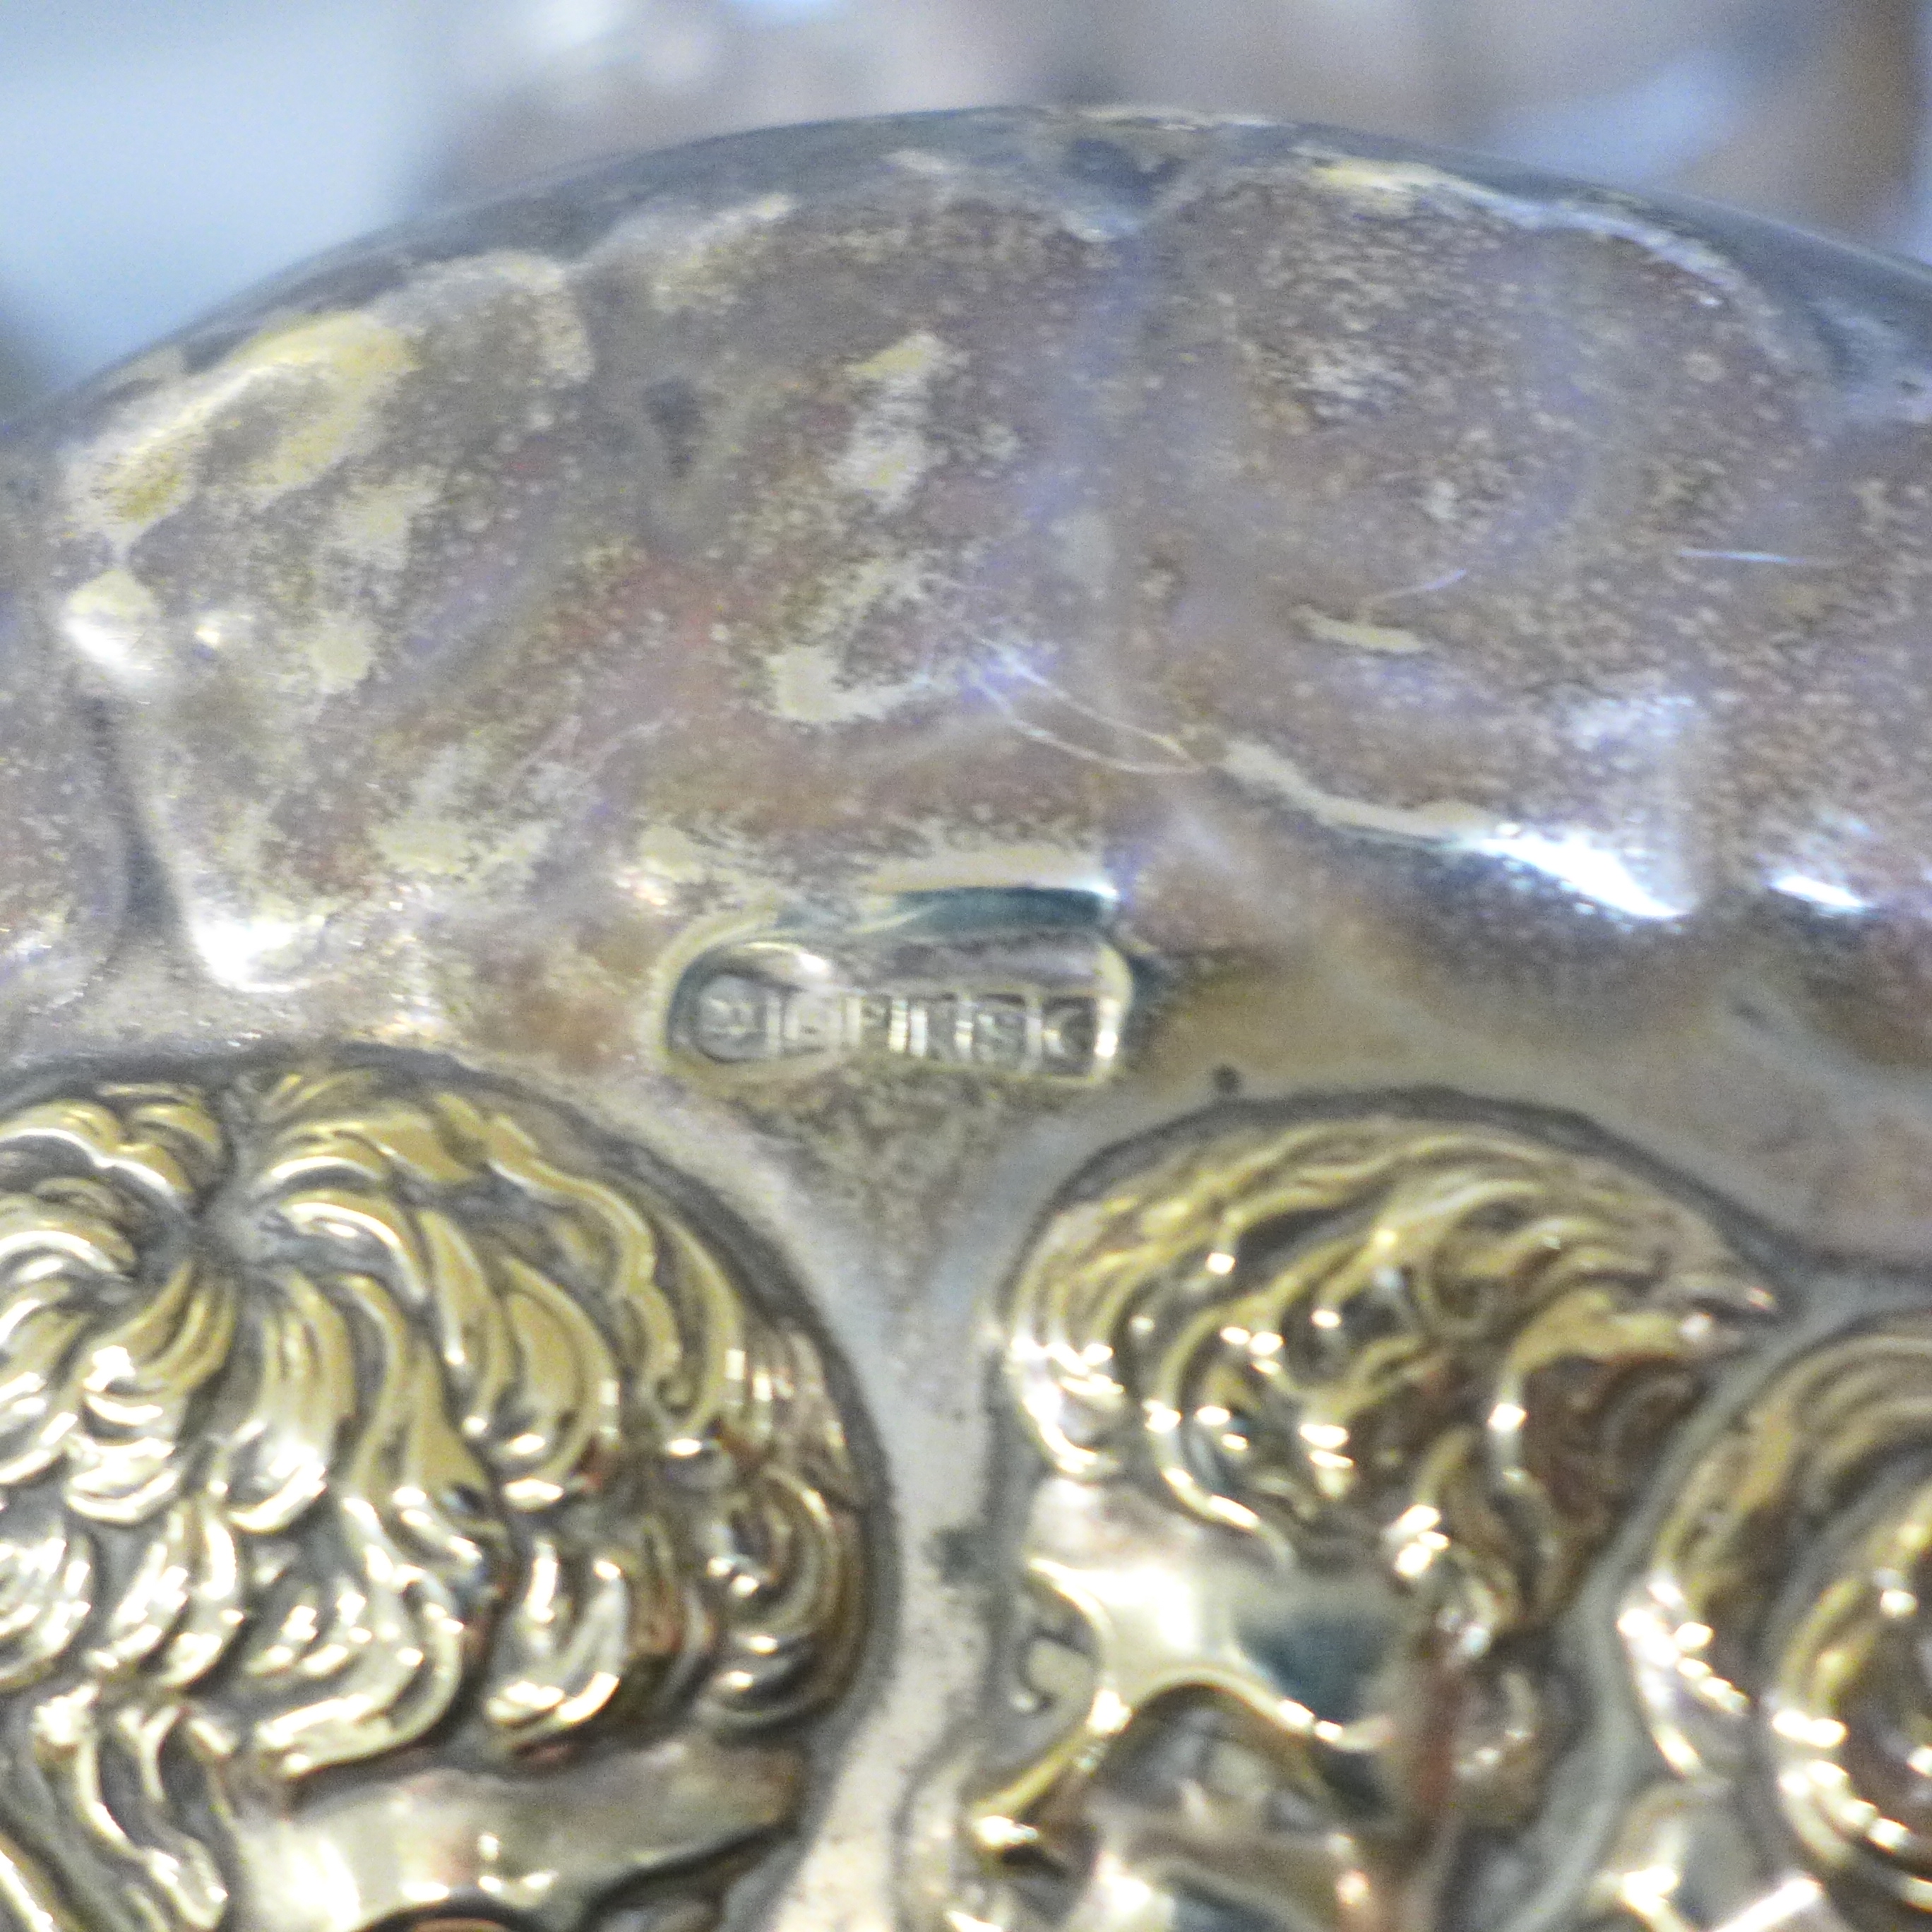 An EPNS Reynolds Angels hand mirror, a metal mounted horse's hoof and a silver plated cruet set on - Image 7 of 7